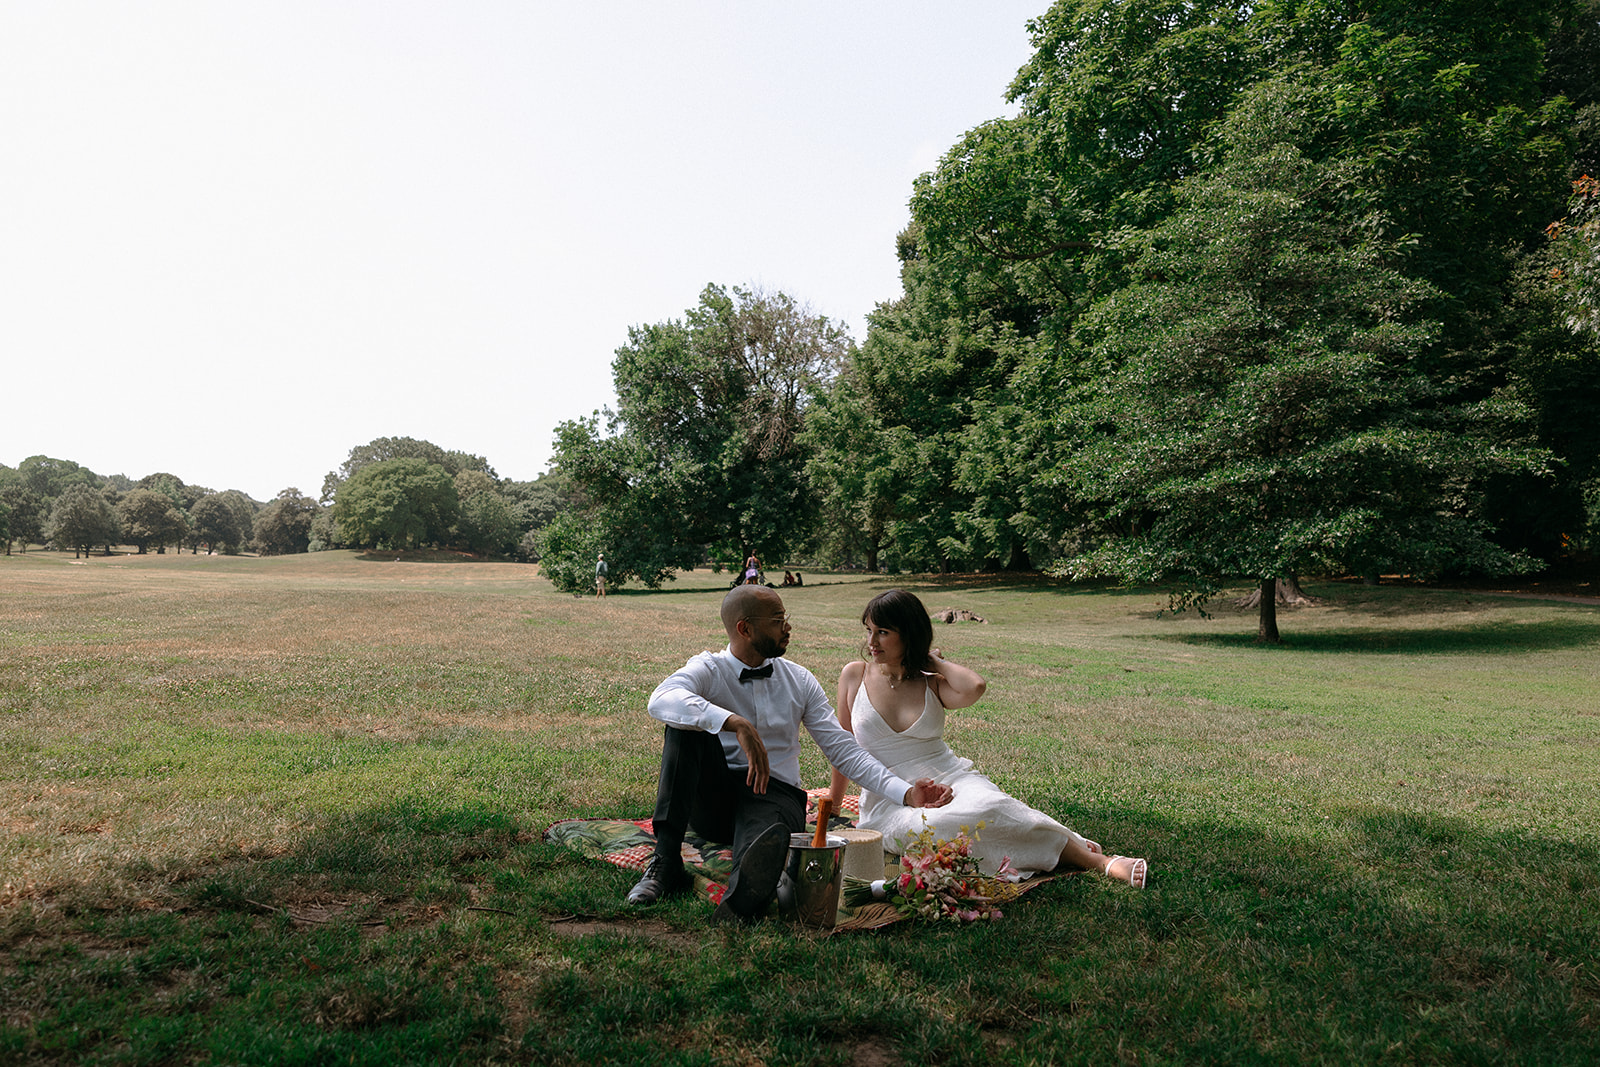 A couple eloping in Brooklyn had an intimate picnic and cake cutting at Prospect Park